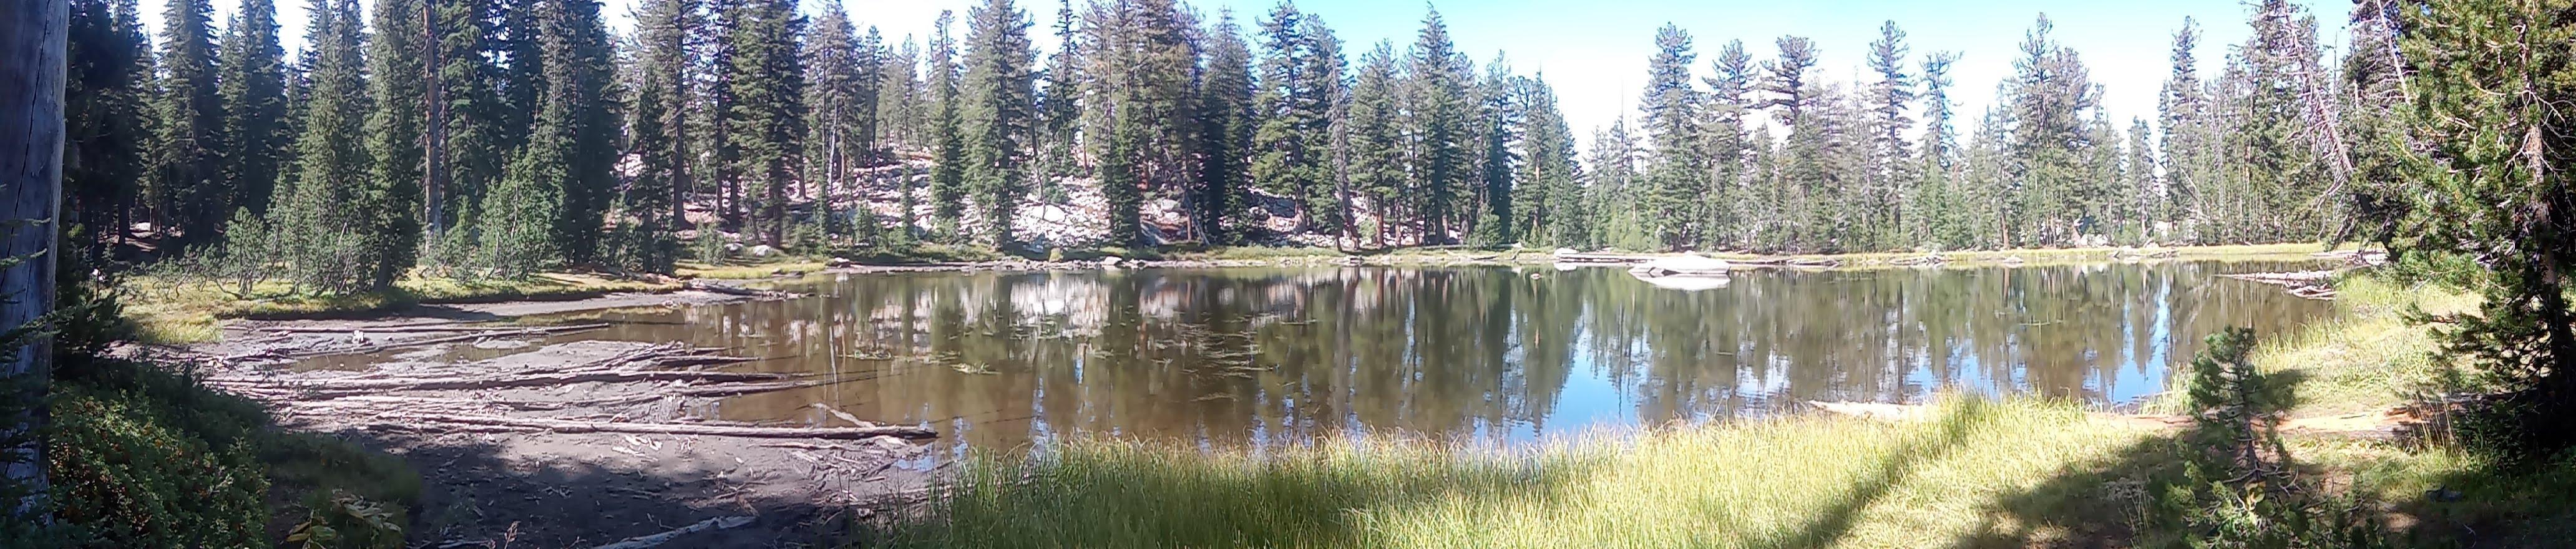 Lake on the bottom of the valley